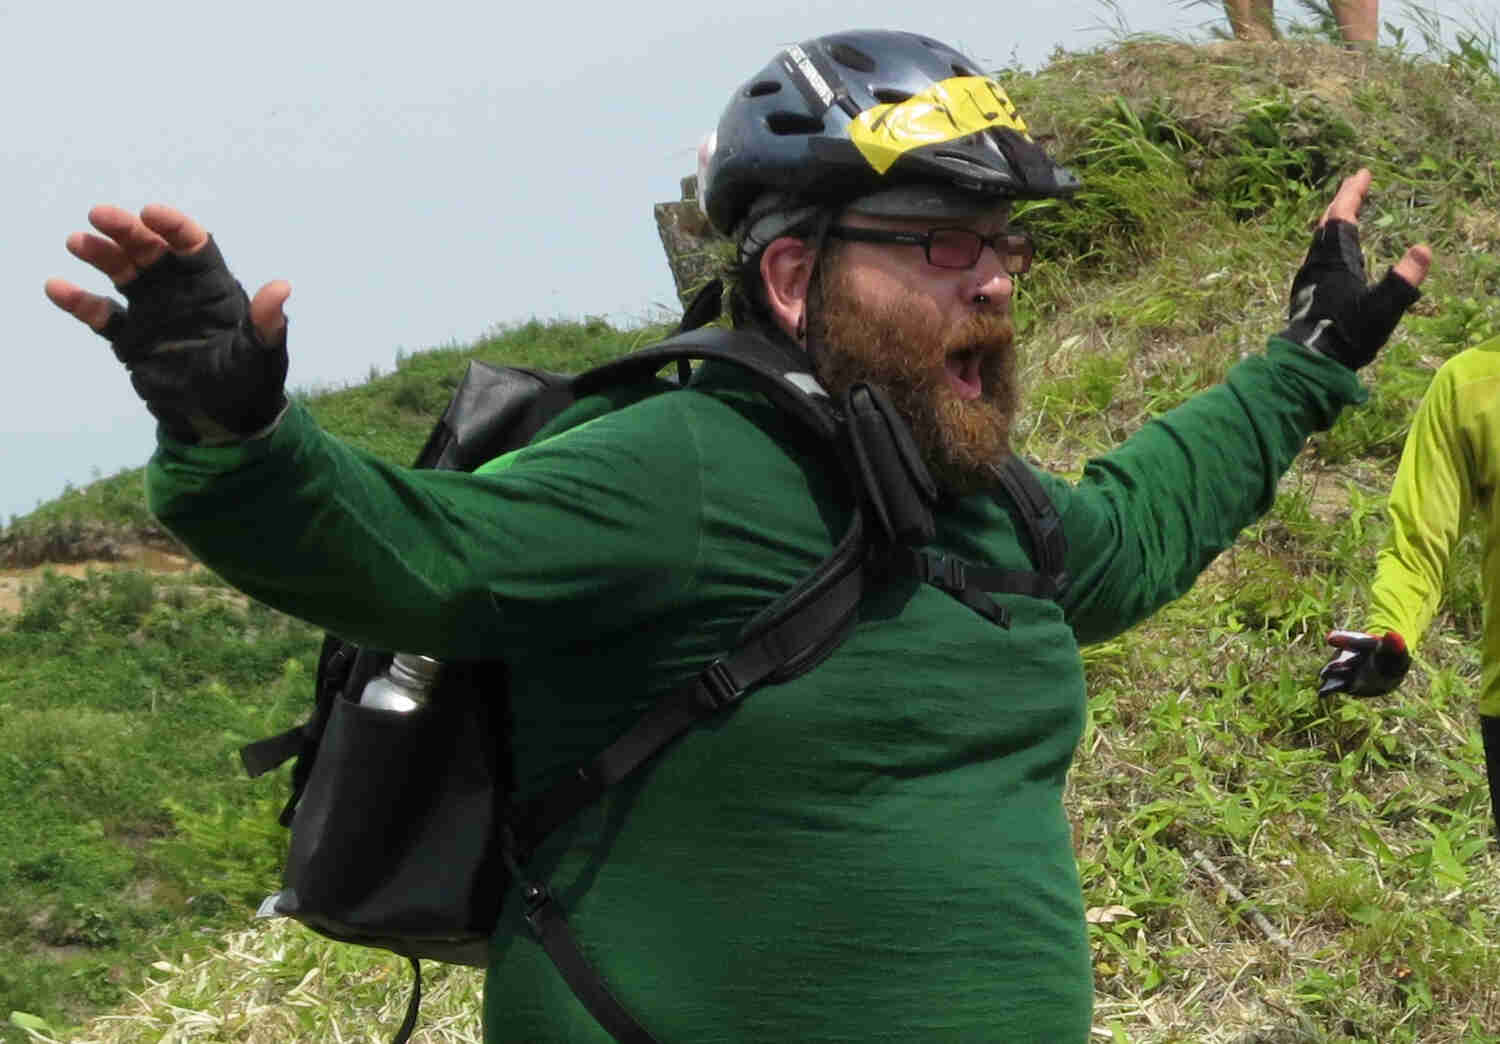 Front, right side, waist up view of a bearded person wearing a bike helmet, standing with their arms outstretched